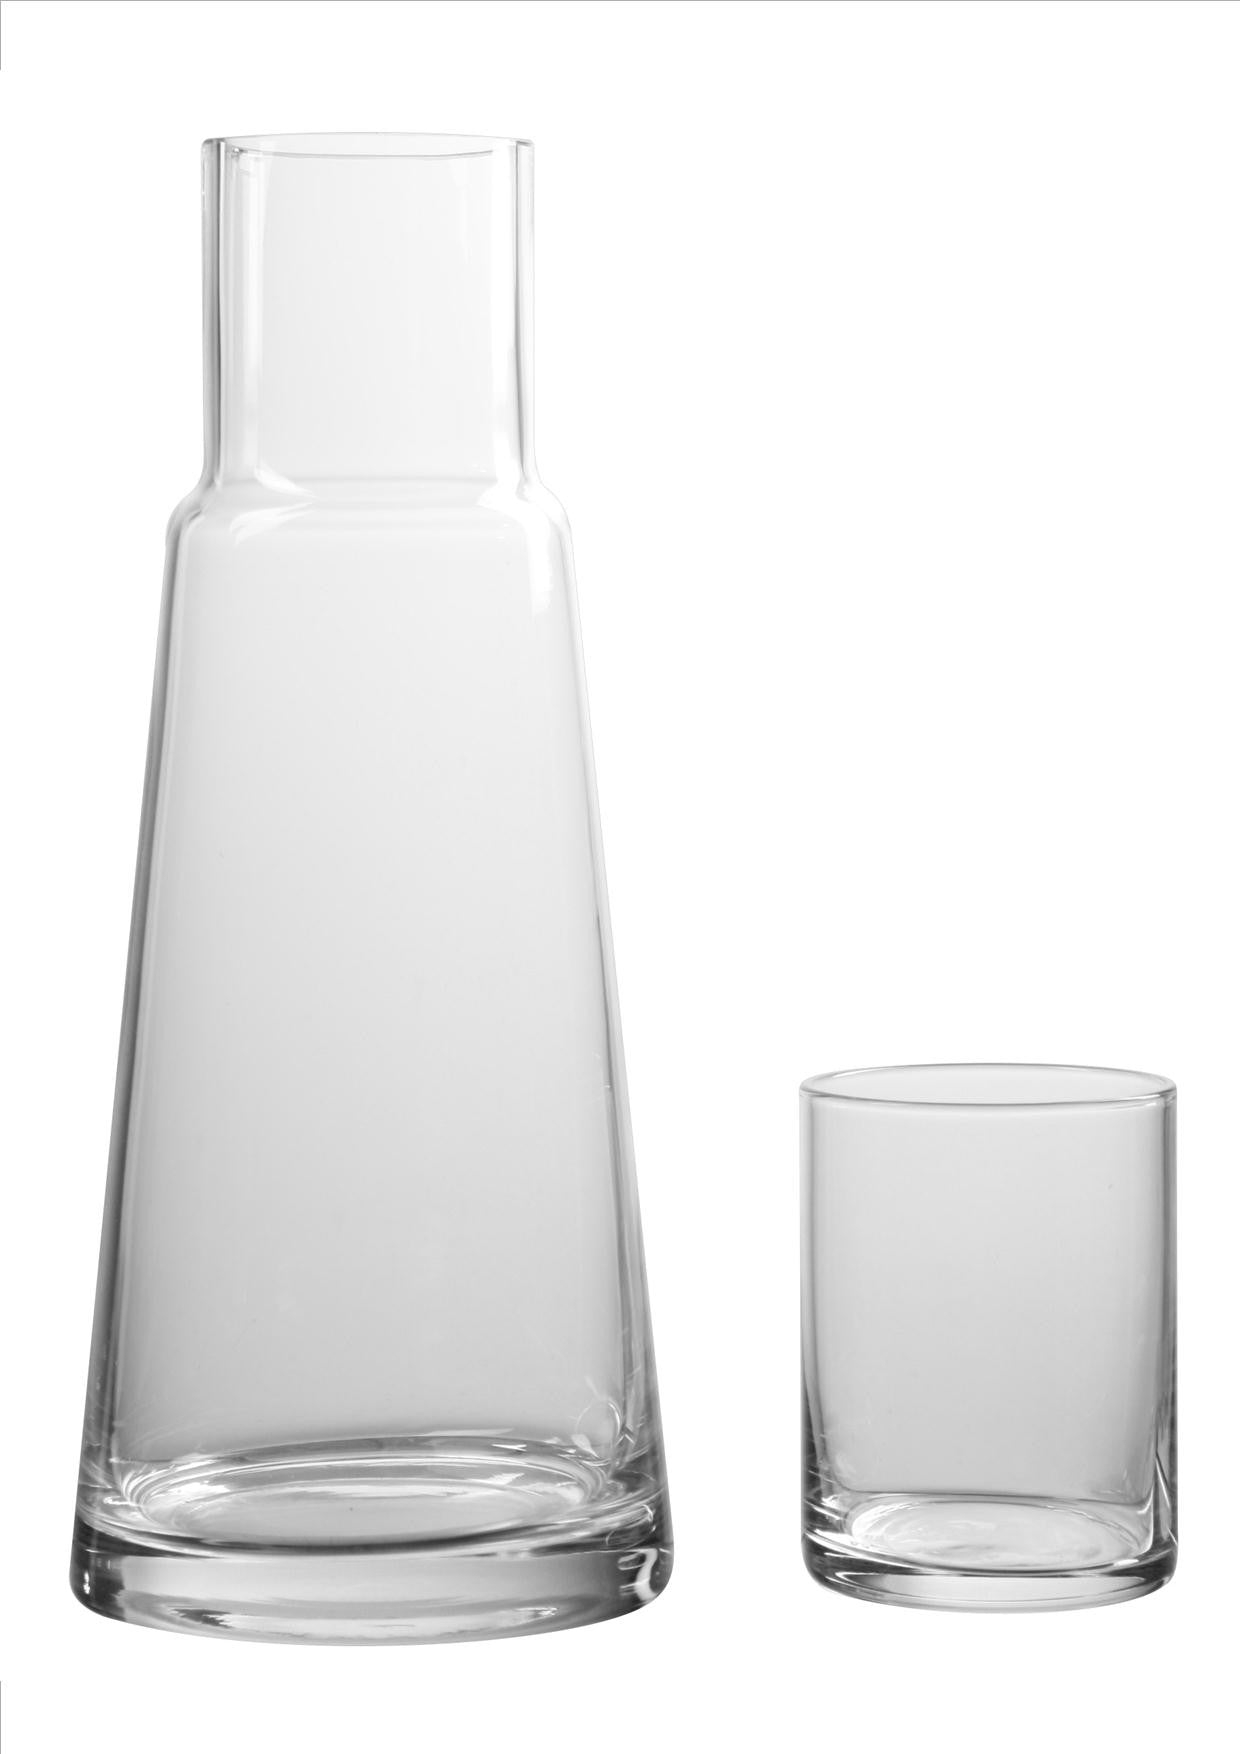 Clear glass carafe with glass tumbler/lid